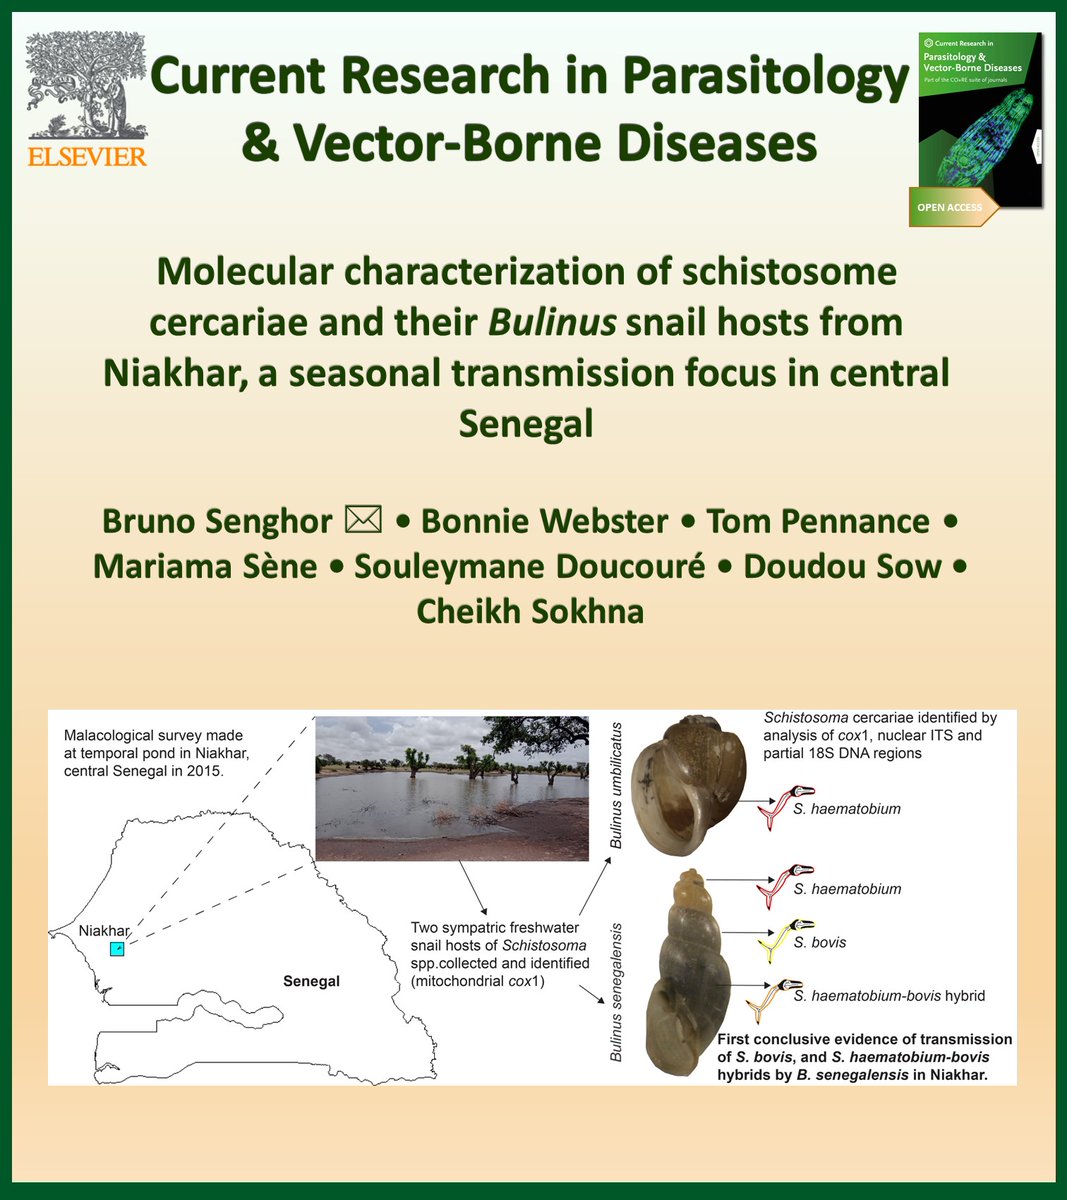 New in @CRPVBD

Molecularly confirmed transmission of Schistosoma bovis, S. haematobium and hybrids by Bulinus senegalensis in Senegal.

▶️sciencedirect.com/science/articl…

#Schistosoma #hybrids #schistosomiasis #Senegal 

@schisto_tom @schistoresearch